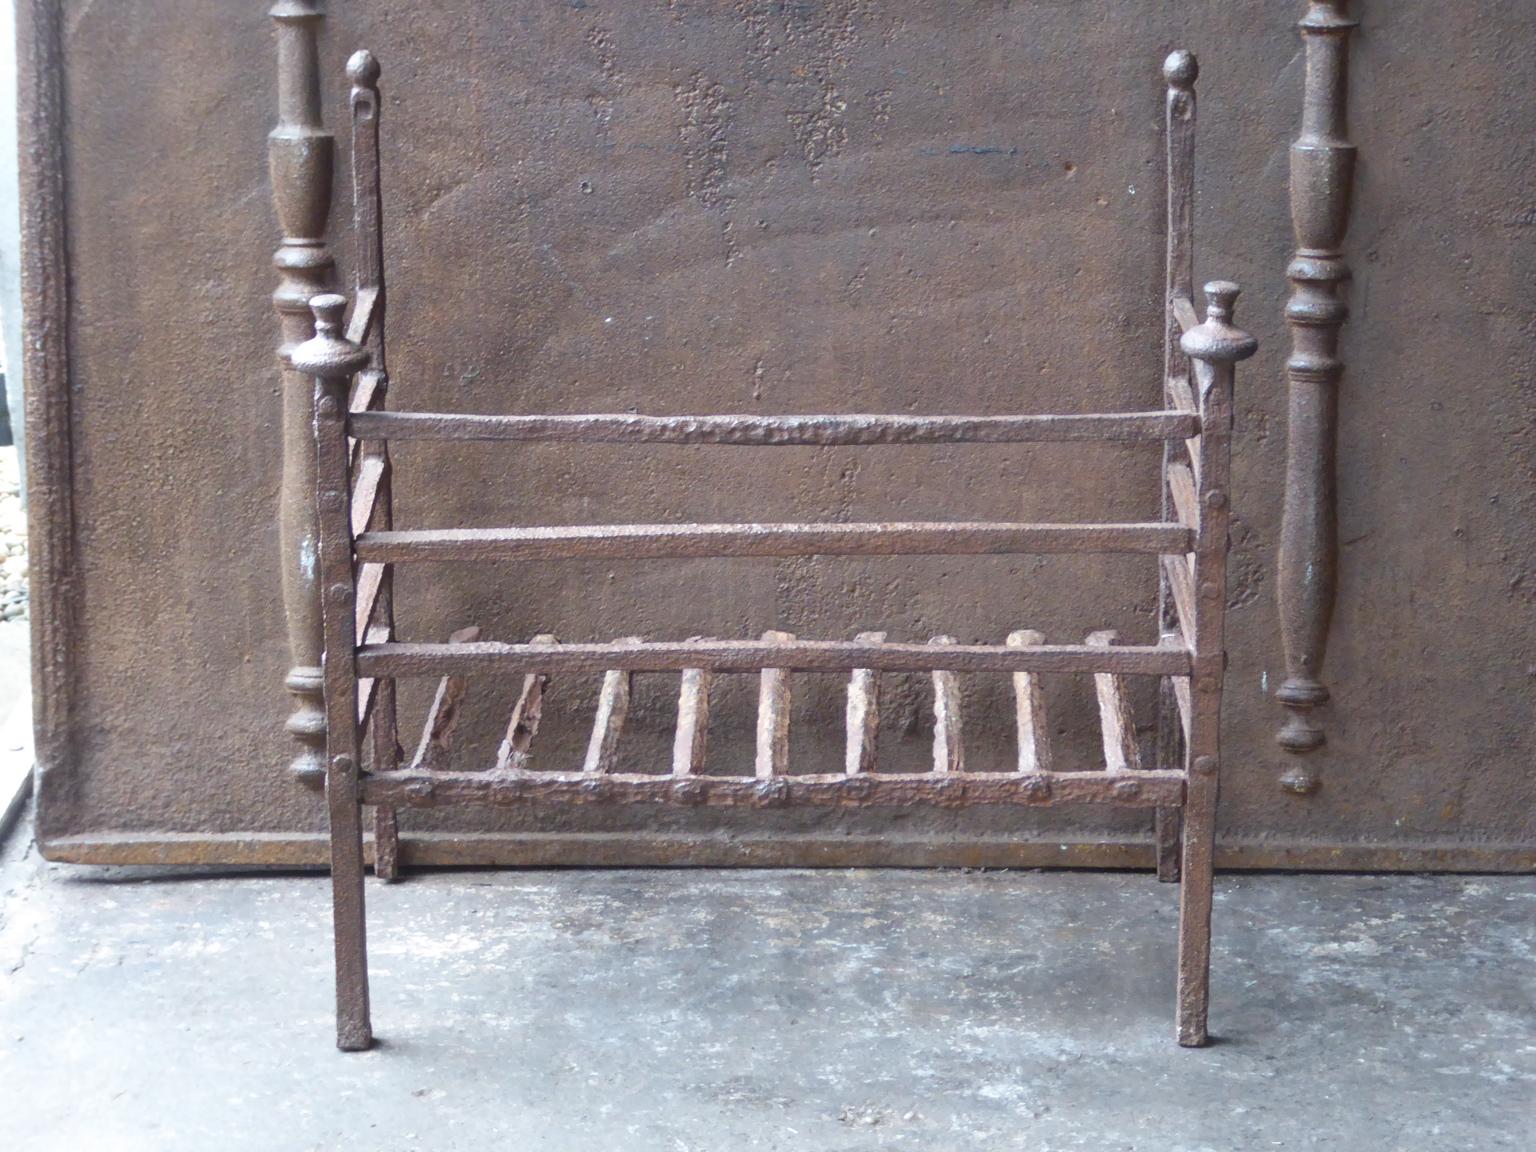 17th-18th century French Gothic fireplace basket - fire basket made of wrought iron. The basket is in a good condition and is fully functional.